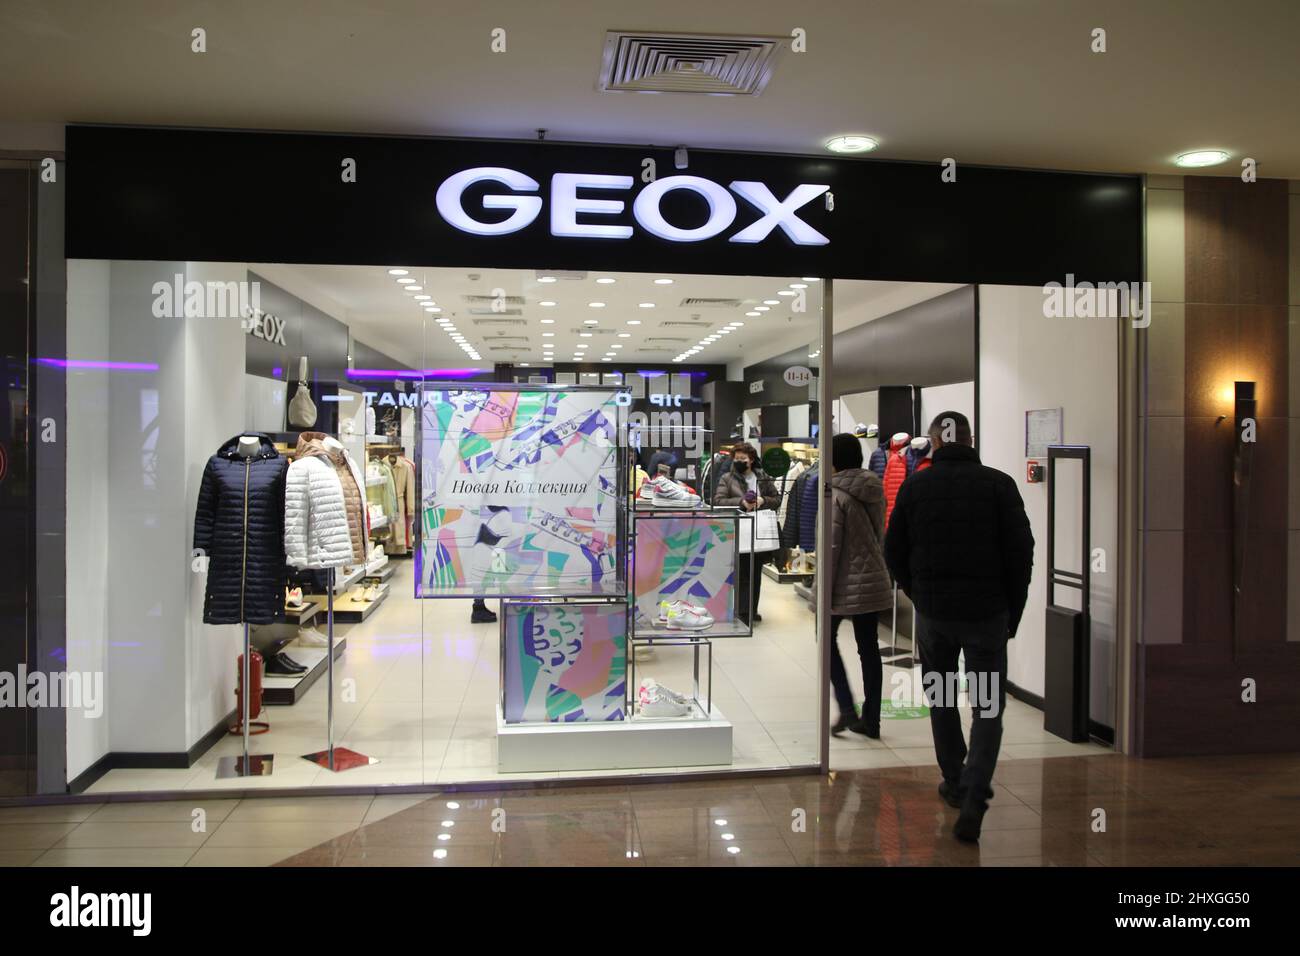 Geox store stock images - Alamy